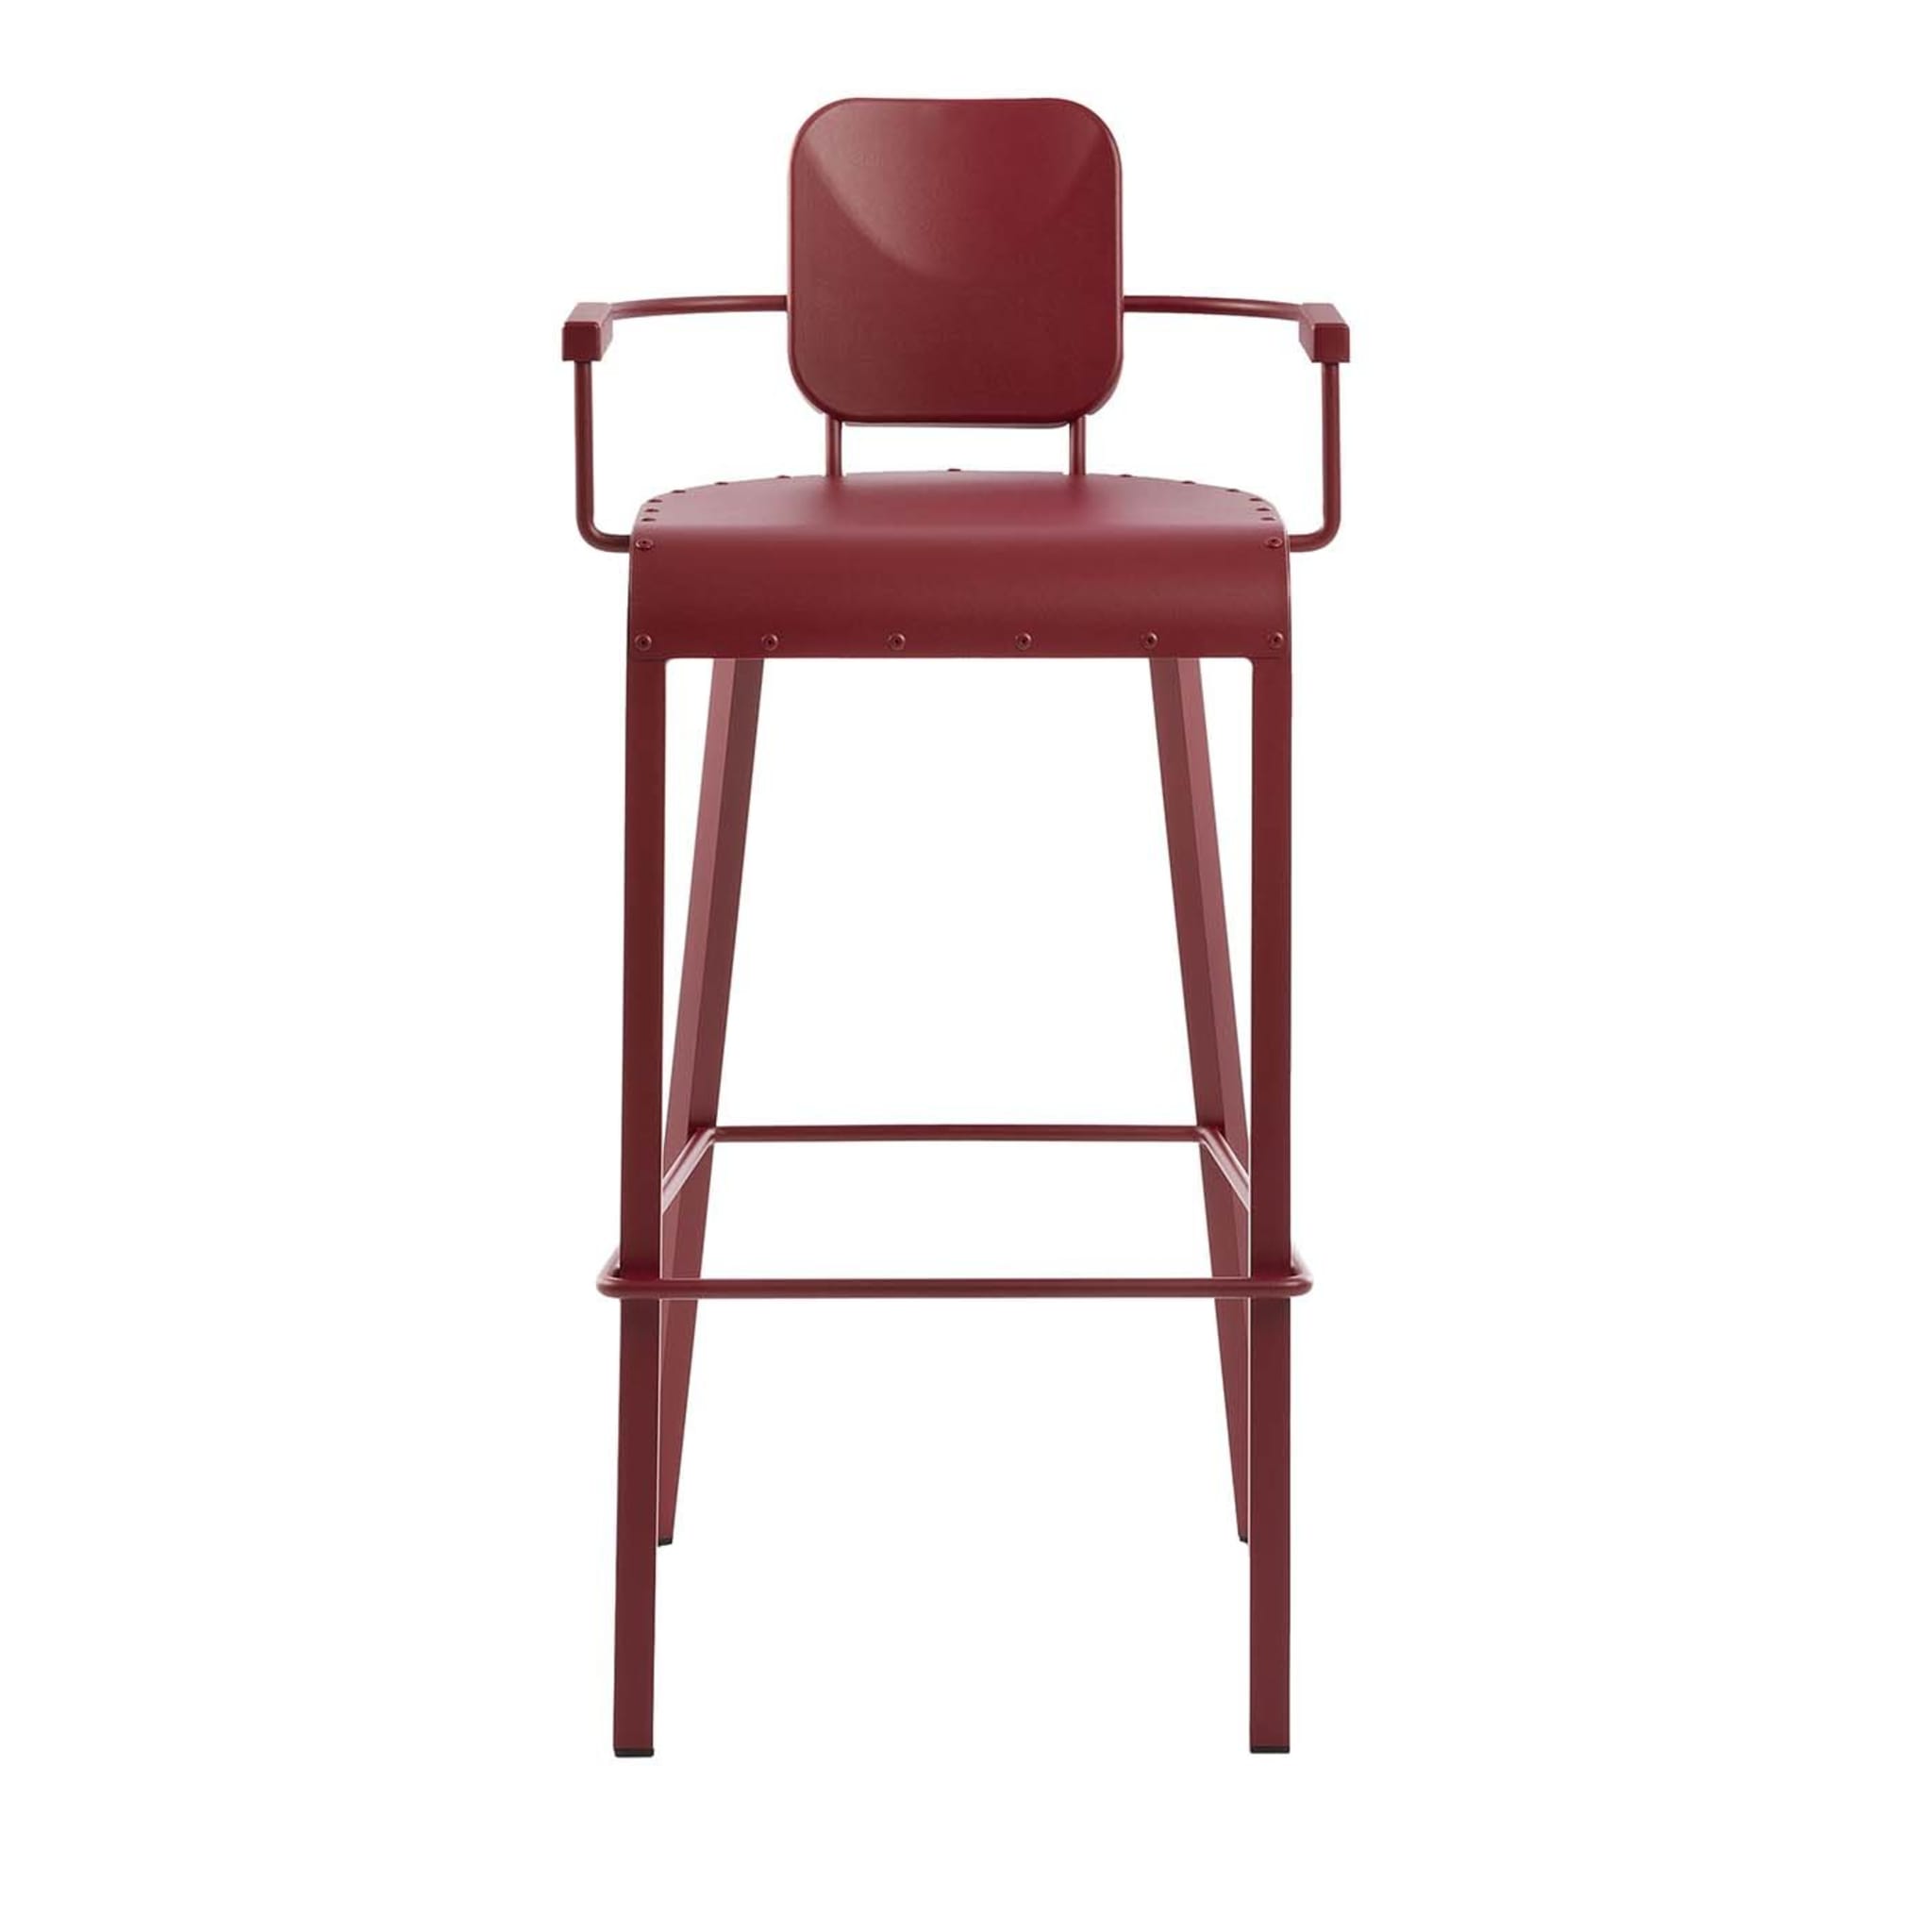 Rock Red Stool by Marc Sadler - Main view